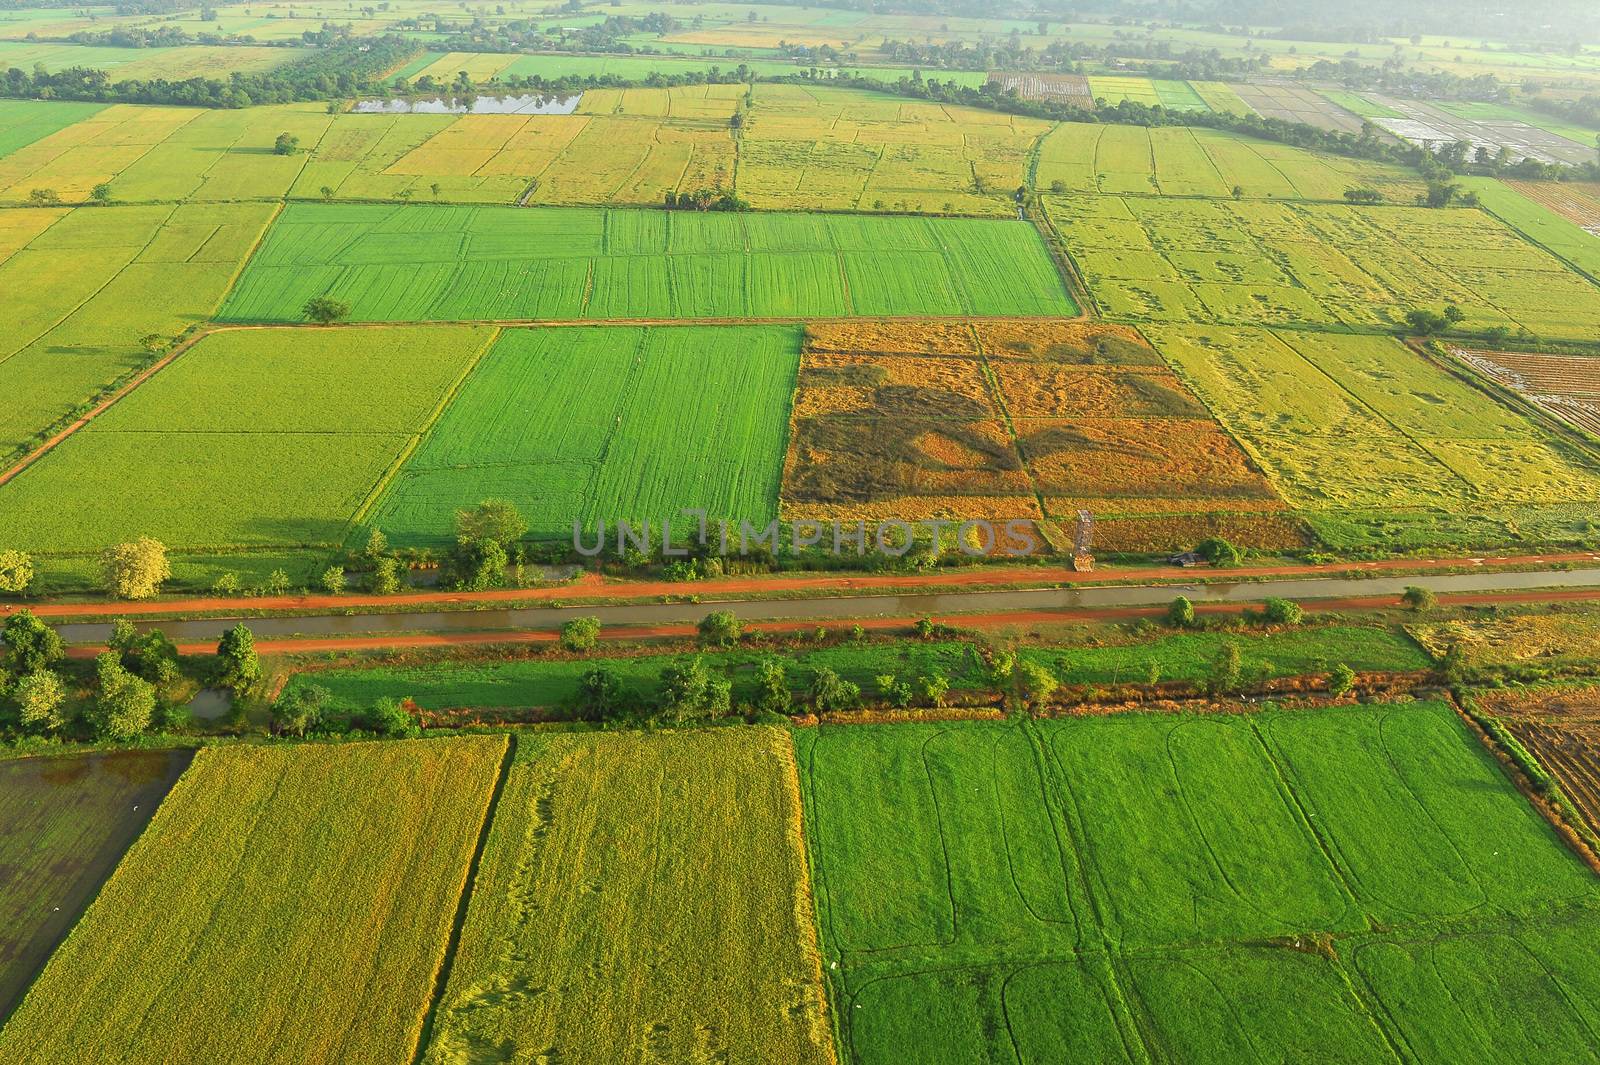 Bird eye view of rice field in Thailand by think4photop